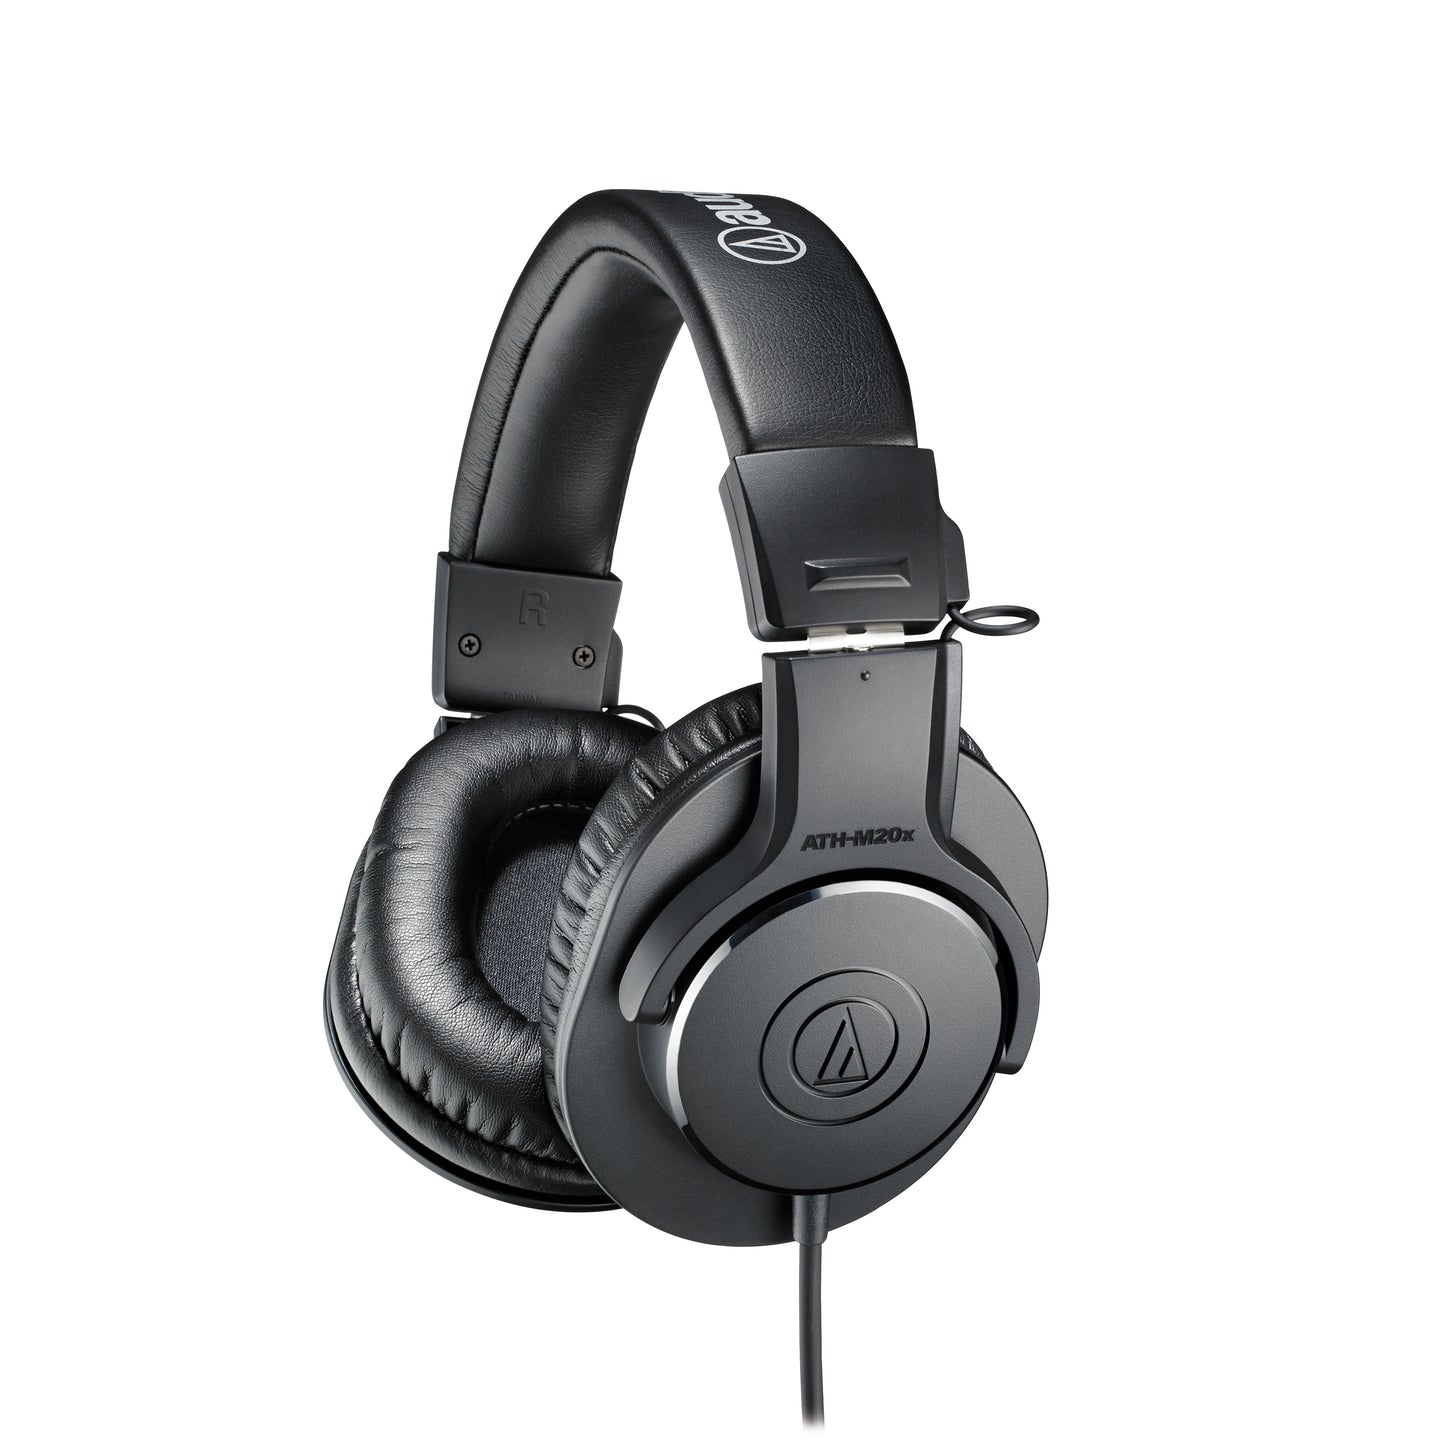 Paquete de streaming/podcasting audio-technica AT2020USB+PK